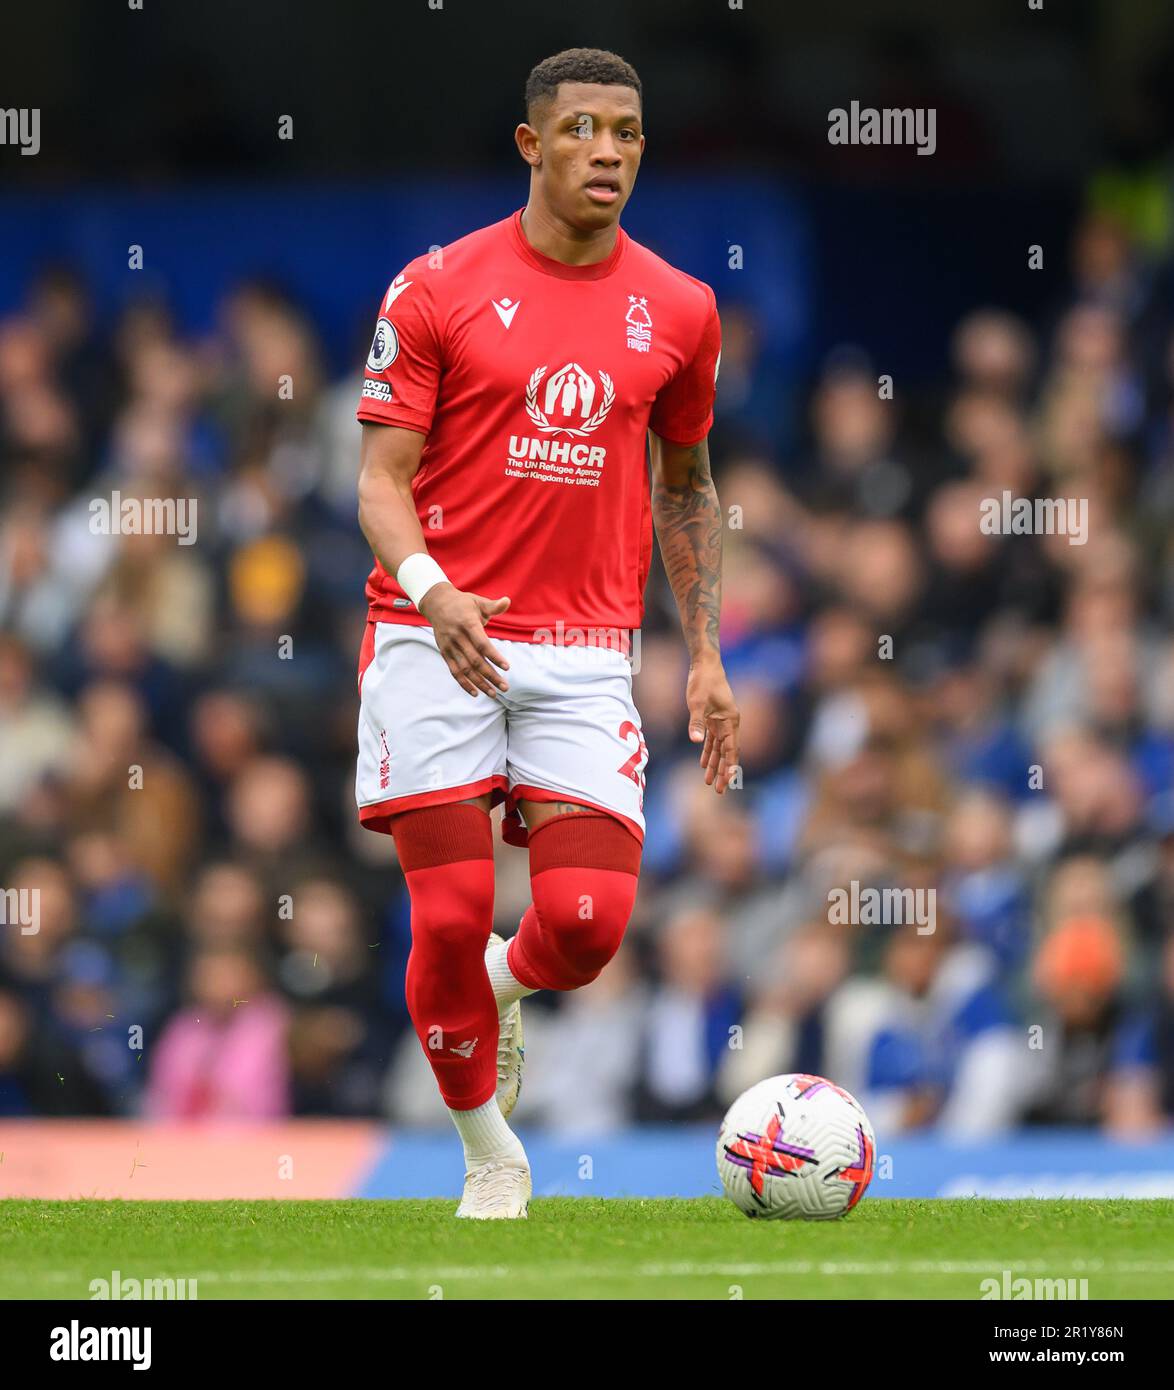 London, UK. 13th May, 2023. 13 May 2023 - Chelsea v Nottingham Forest - Premier League - Stamford Bridge Nottingham Forest's Danilo during the Premier League match at Stamford Bridge, London. Picture Credit: Mark Pain/Alamy Live News Stock Photo